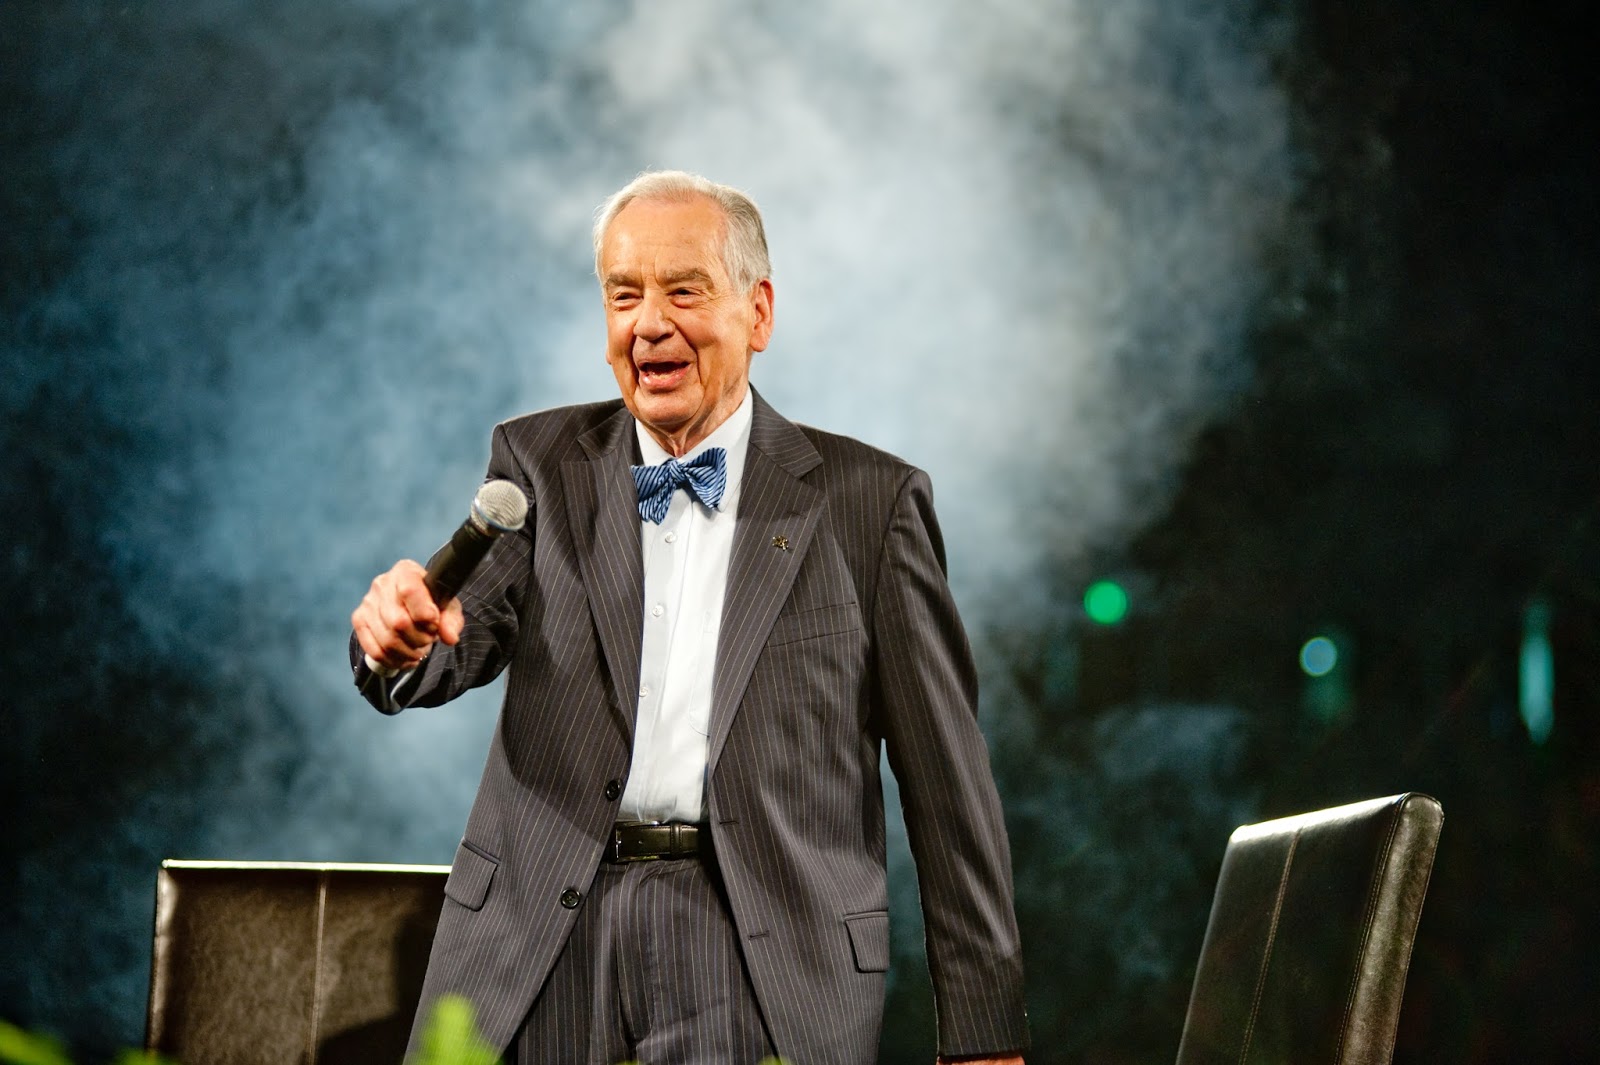 19 Success Tips to Unlock Your Potential from the Father of Motivation Zig Ziglar